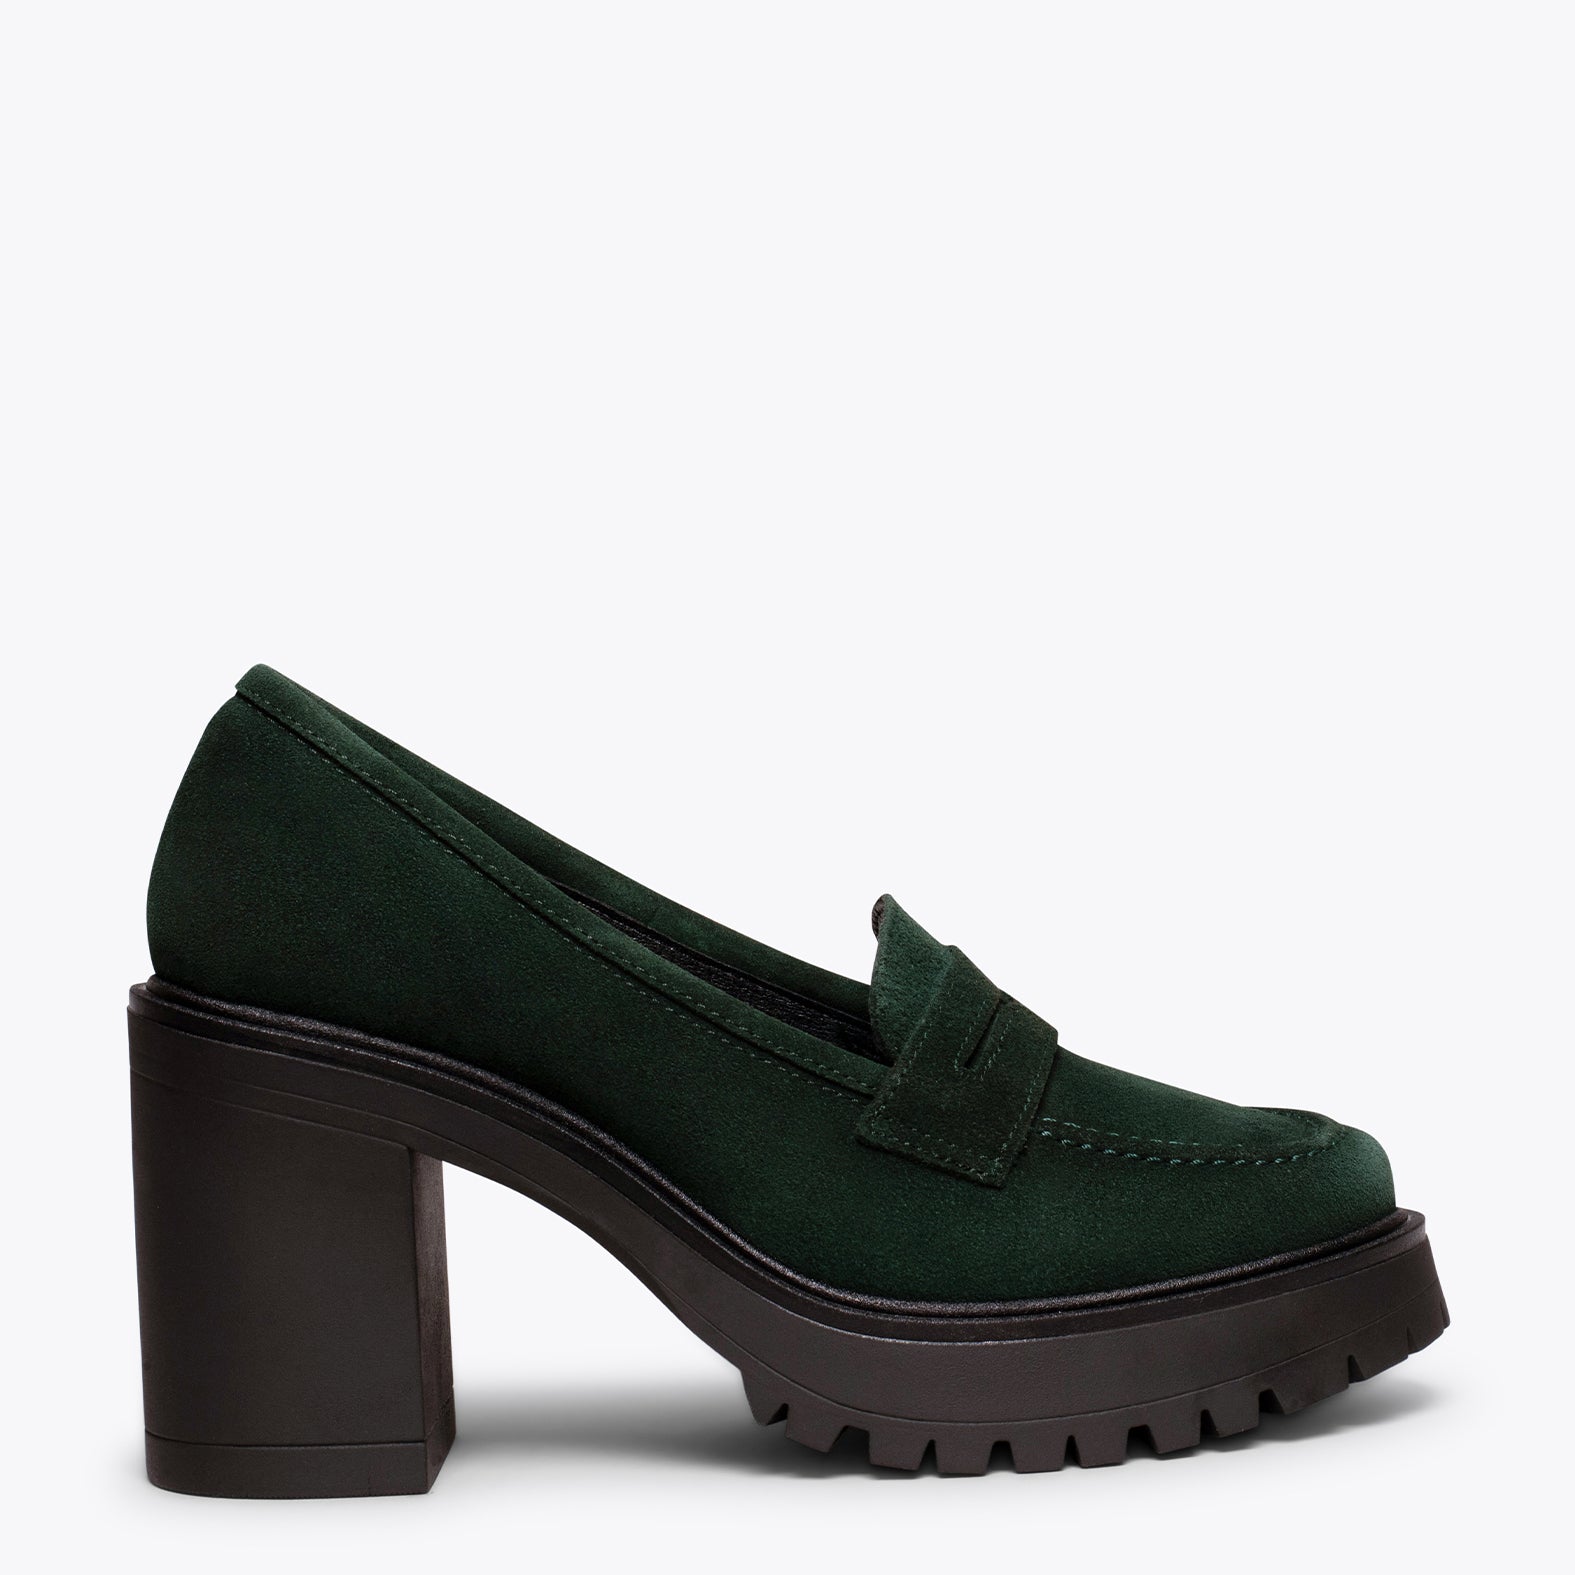 TRACK – GREEN high heel moccasin with track sole